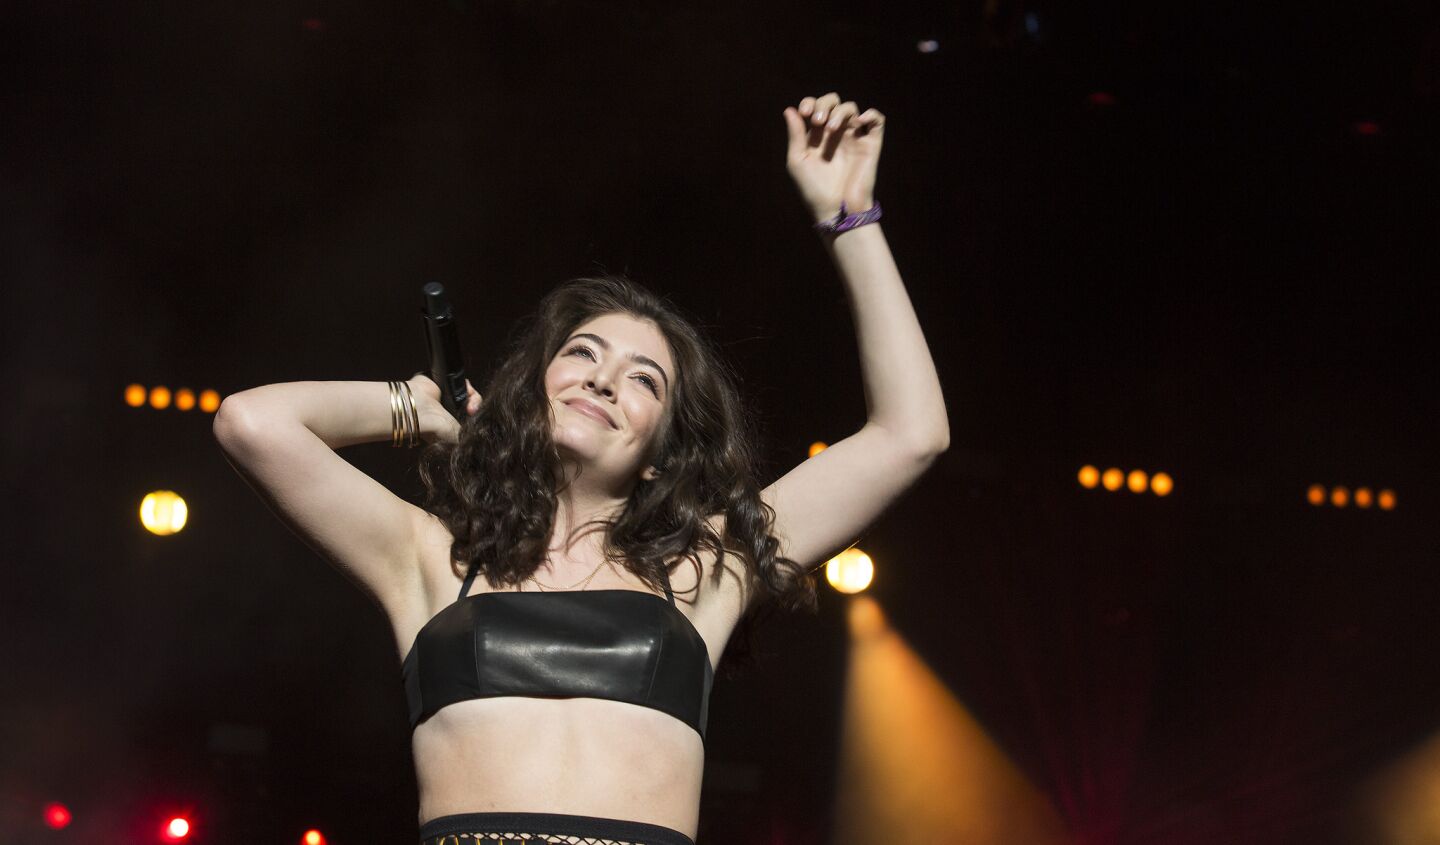 Lorde joins Disclosure on stage.